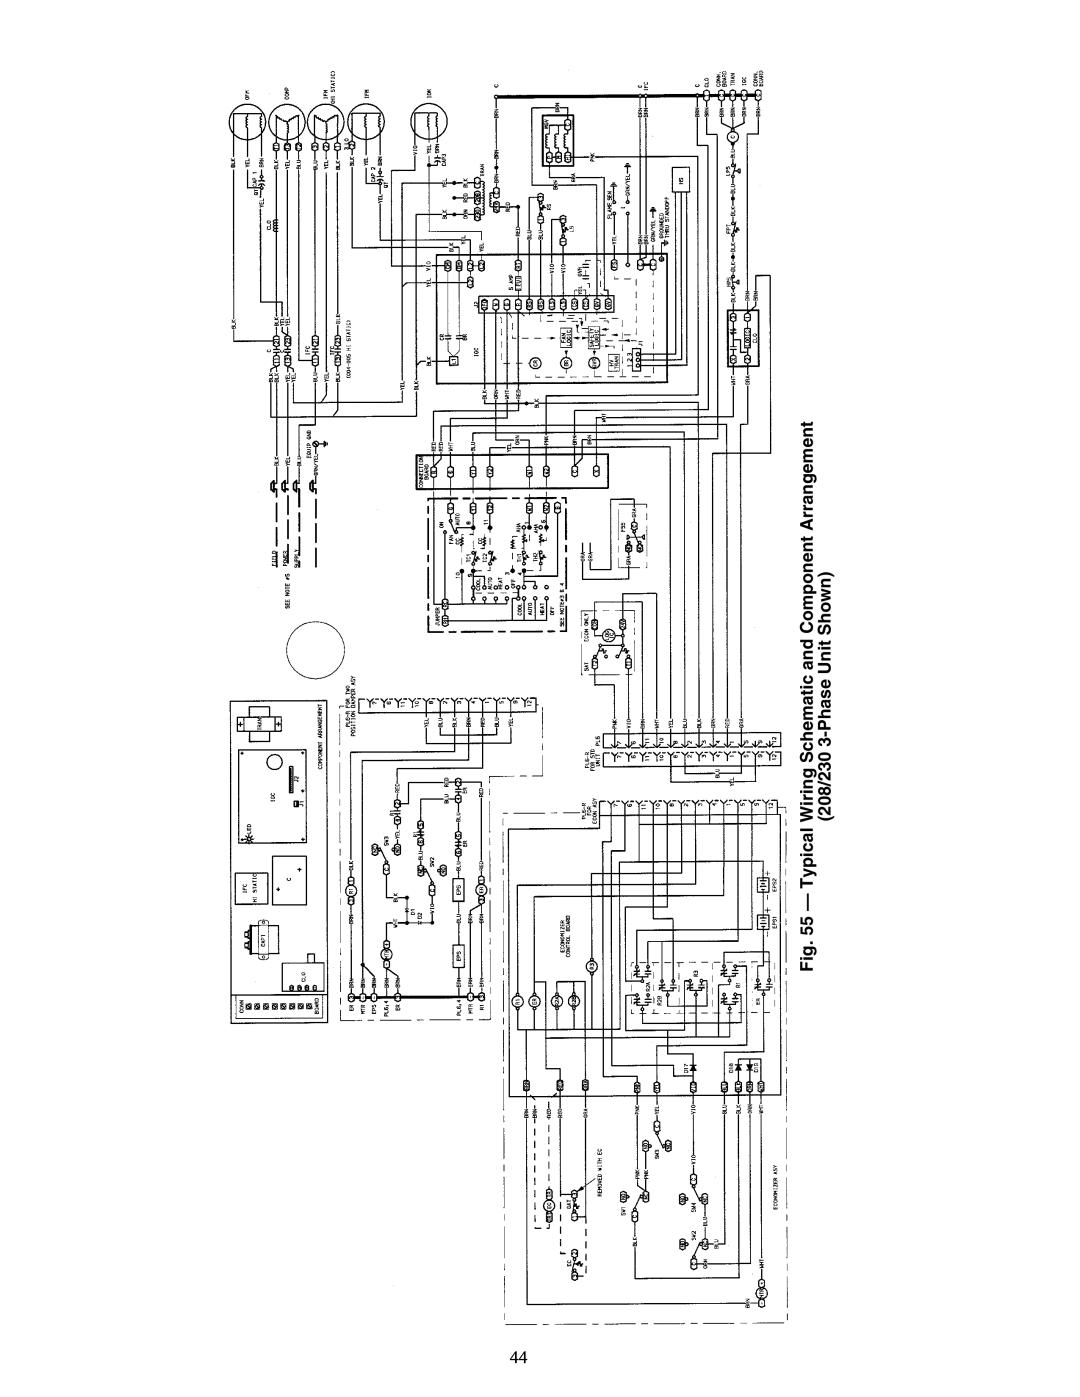 Carrier 48HJD005-007 specifications Typical Wiring Schematic and Component Arrangement, 208/230 3-Phase Unit Shown 